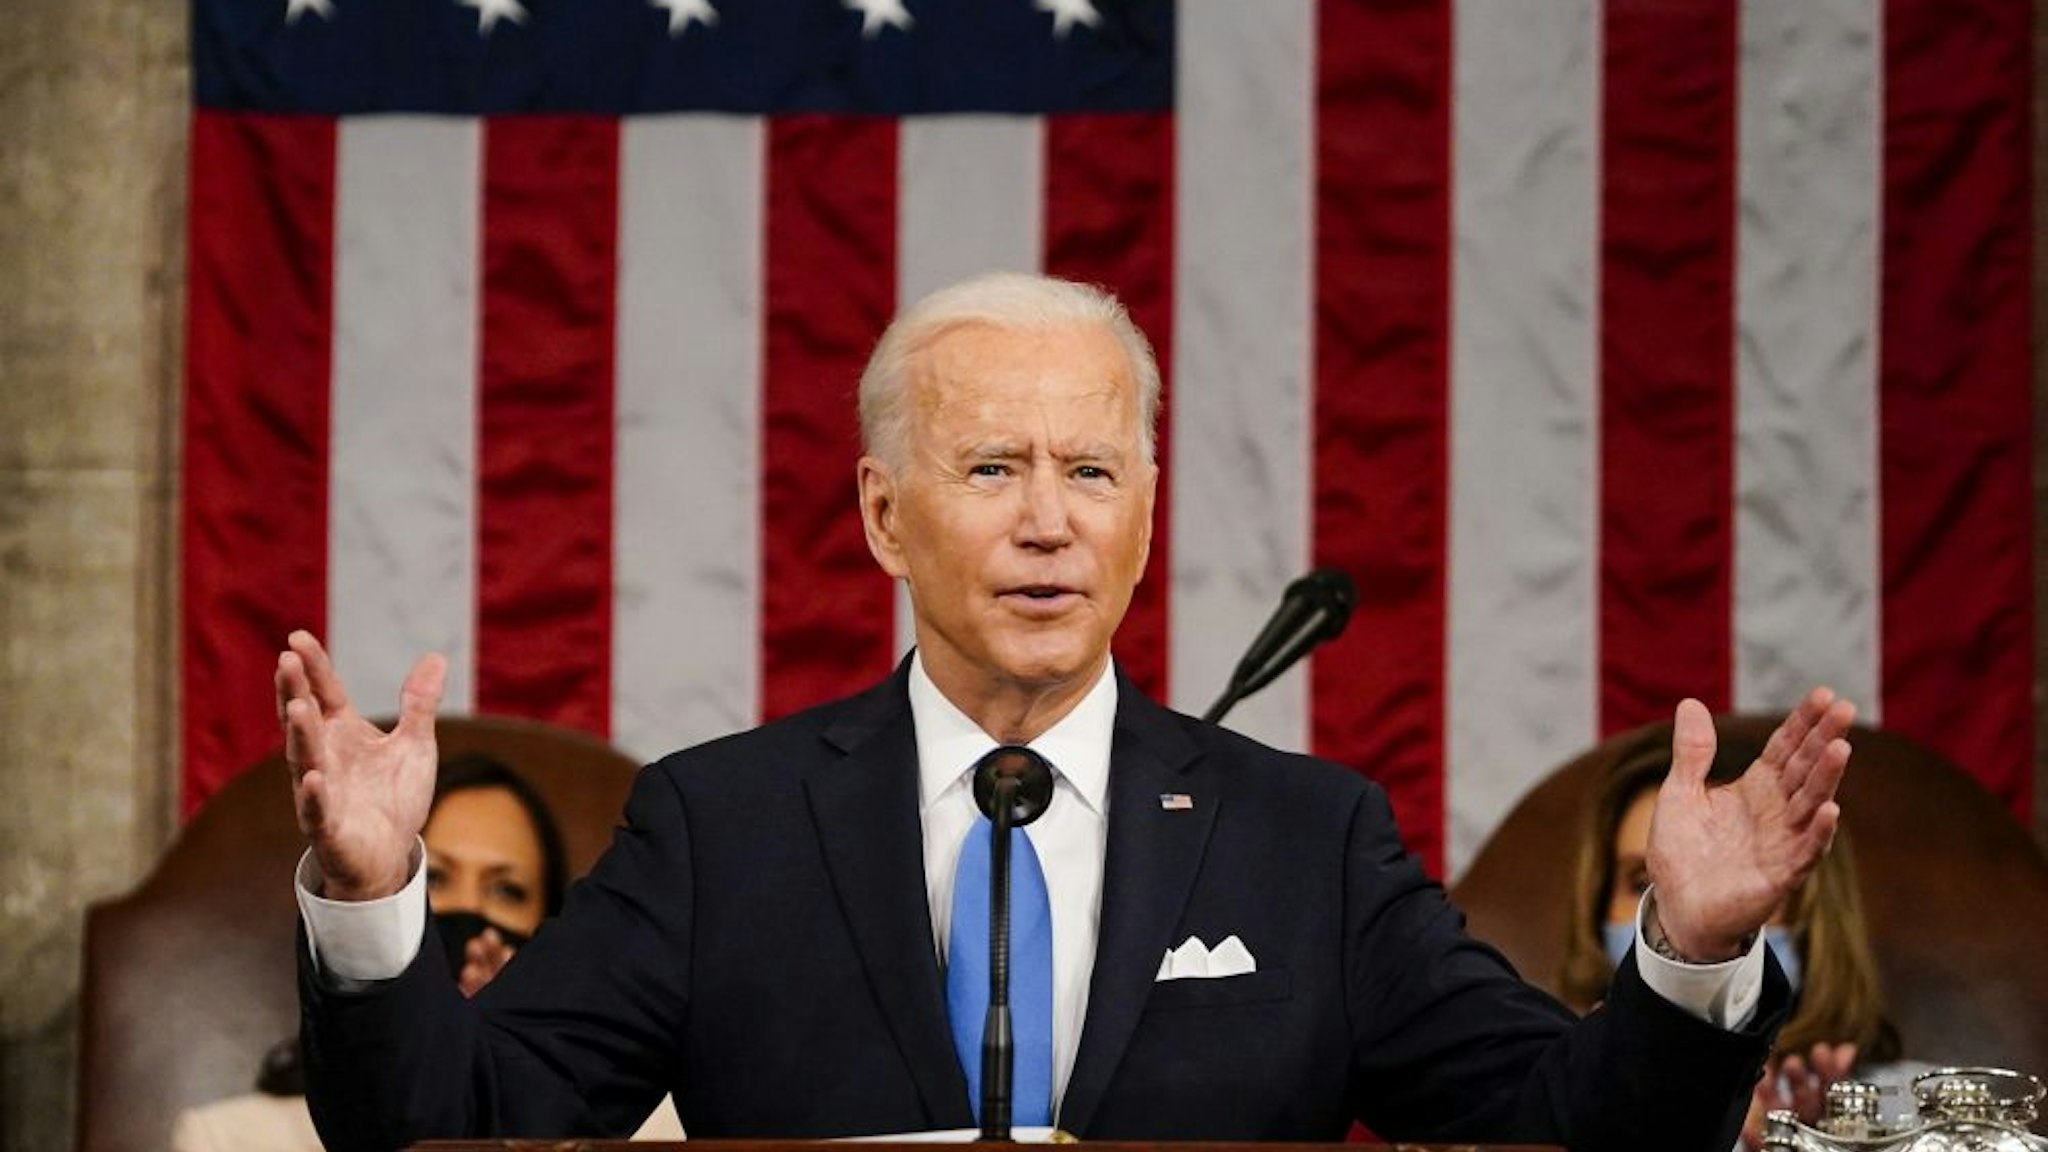 WASHINGTON, DC - APRIL 28: President Joe Biden addresses a joint session of Congress, with Vice President Kamala Harris and House Speaker Nancy Pelosi (D-Calif.) on the dais behind him, on Wednesday, April 28, 2021. Biden spoke to a nation seeking to emerge from twin crises of pandemic and economic slide in his first speech to a joint session of Congress.